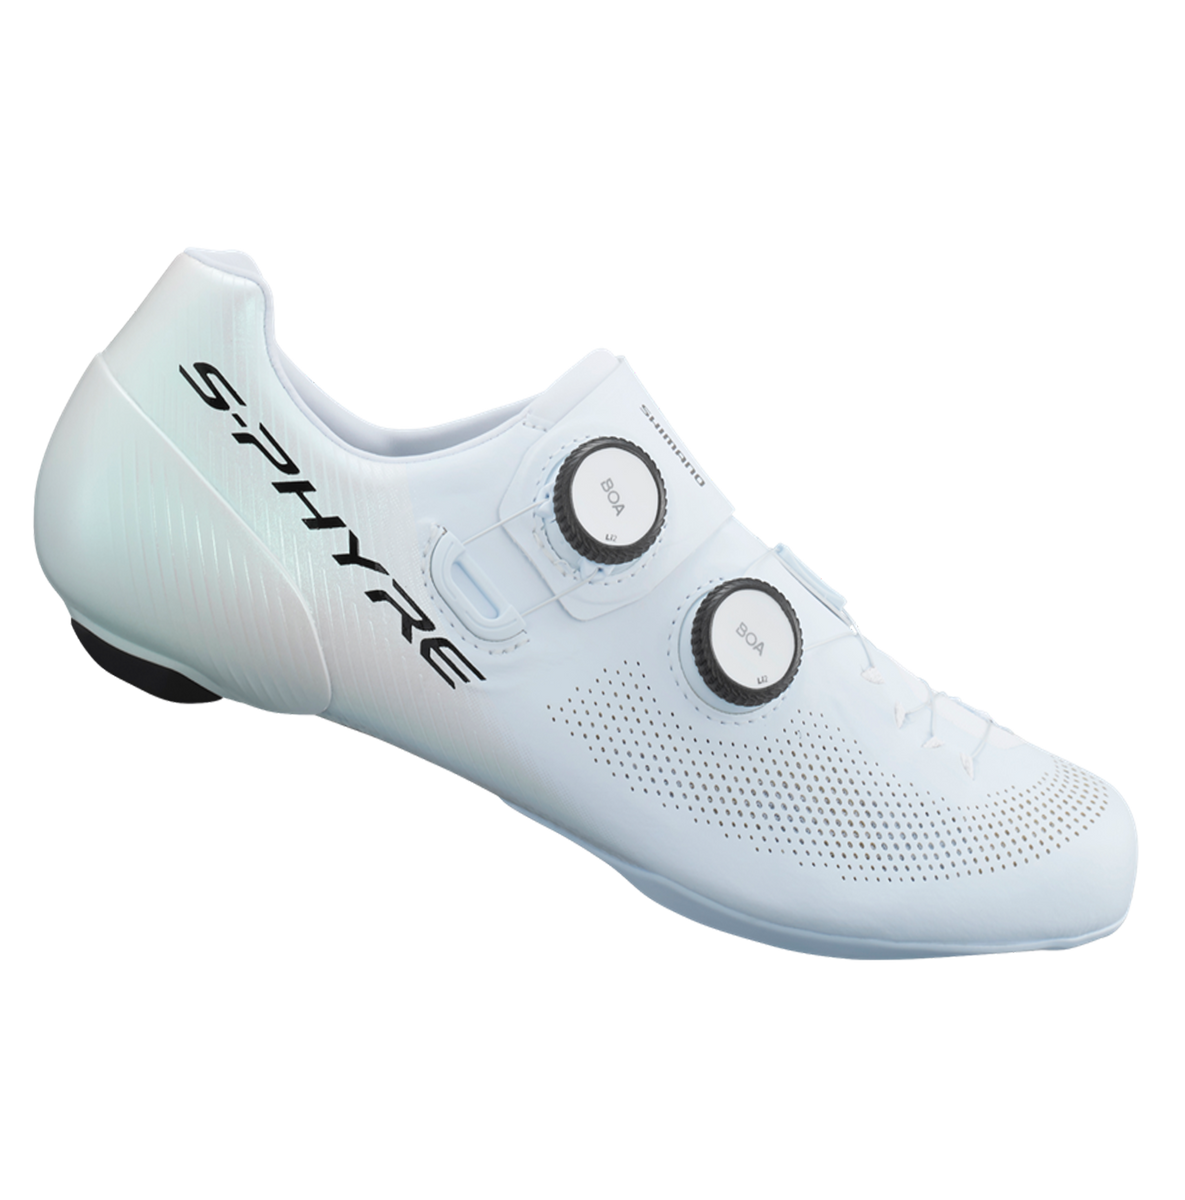 Shimano RC903 Shoes | Tay Junction